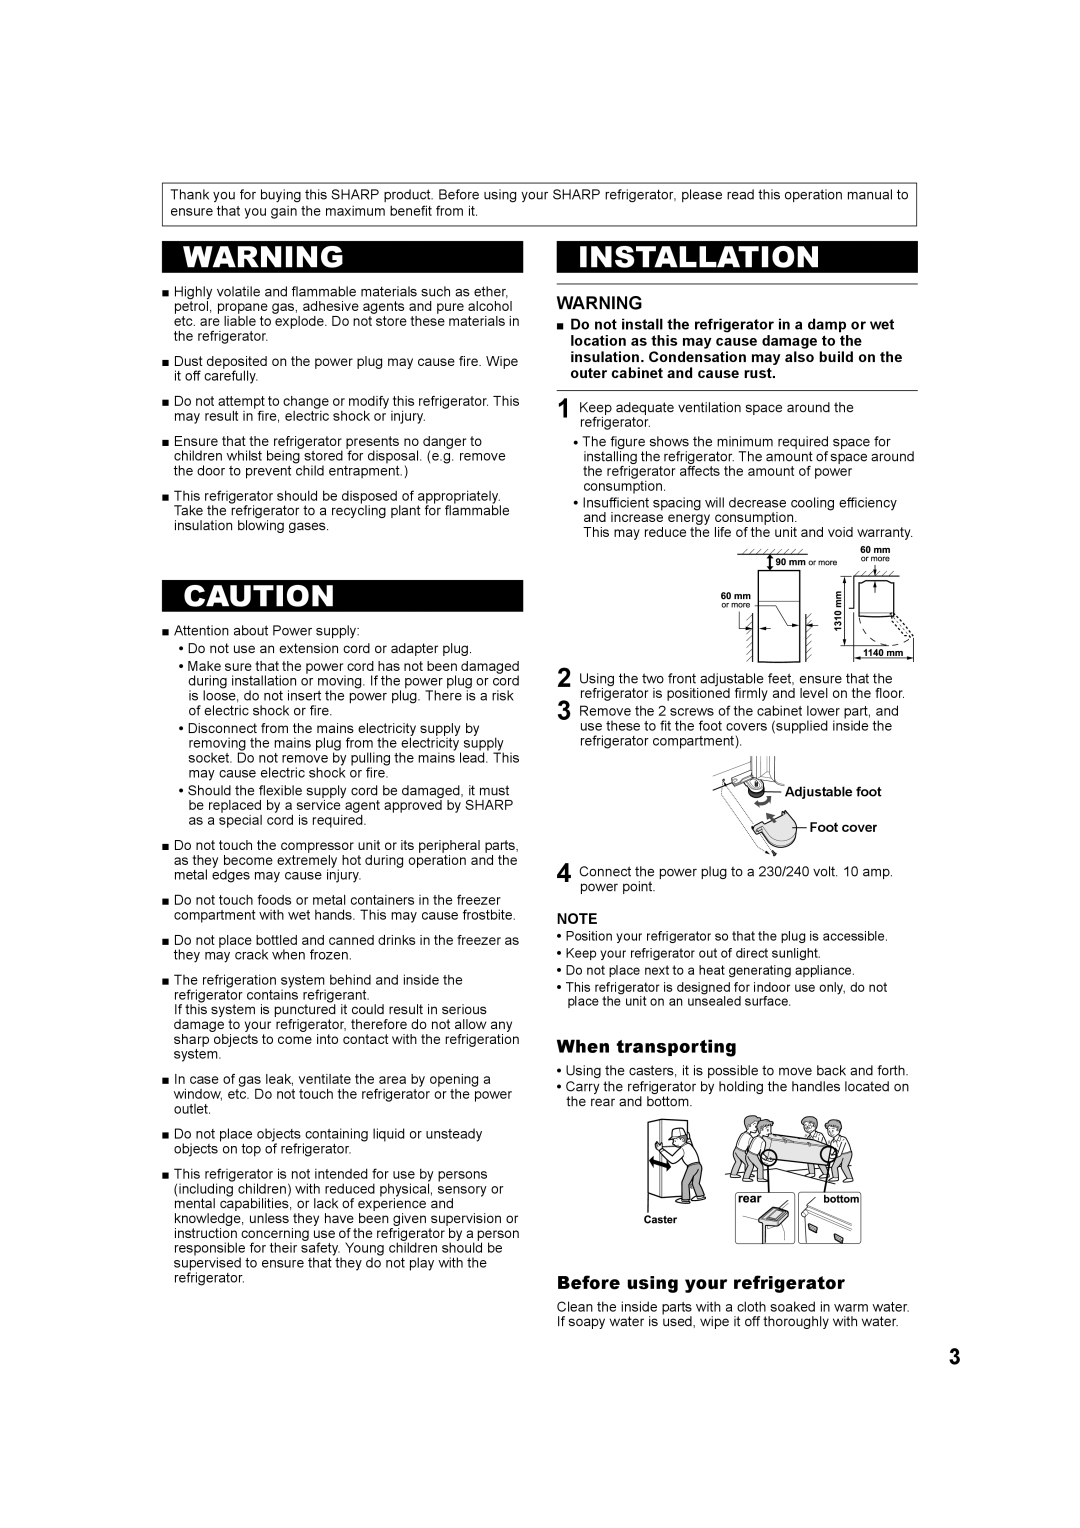 Sharp SJ-T431R operation manual Installation, When transporting, Before using your refrigerator 